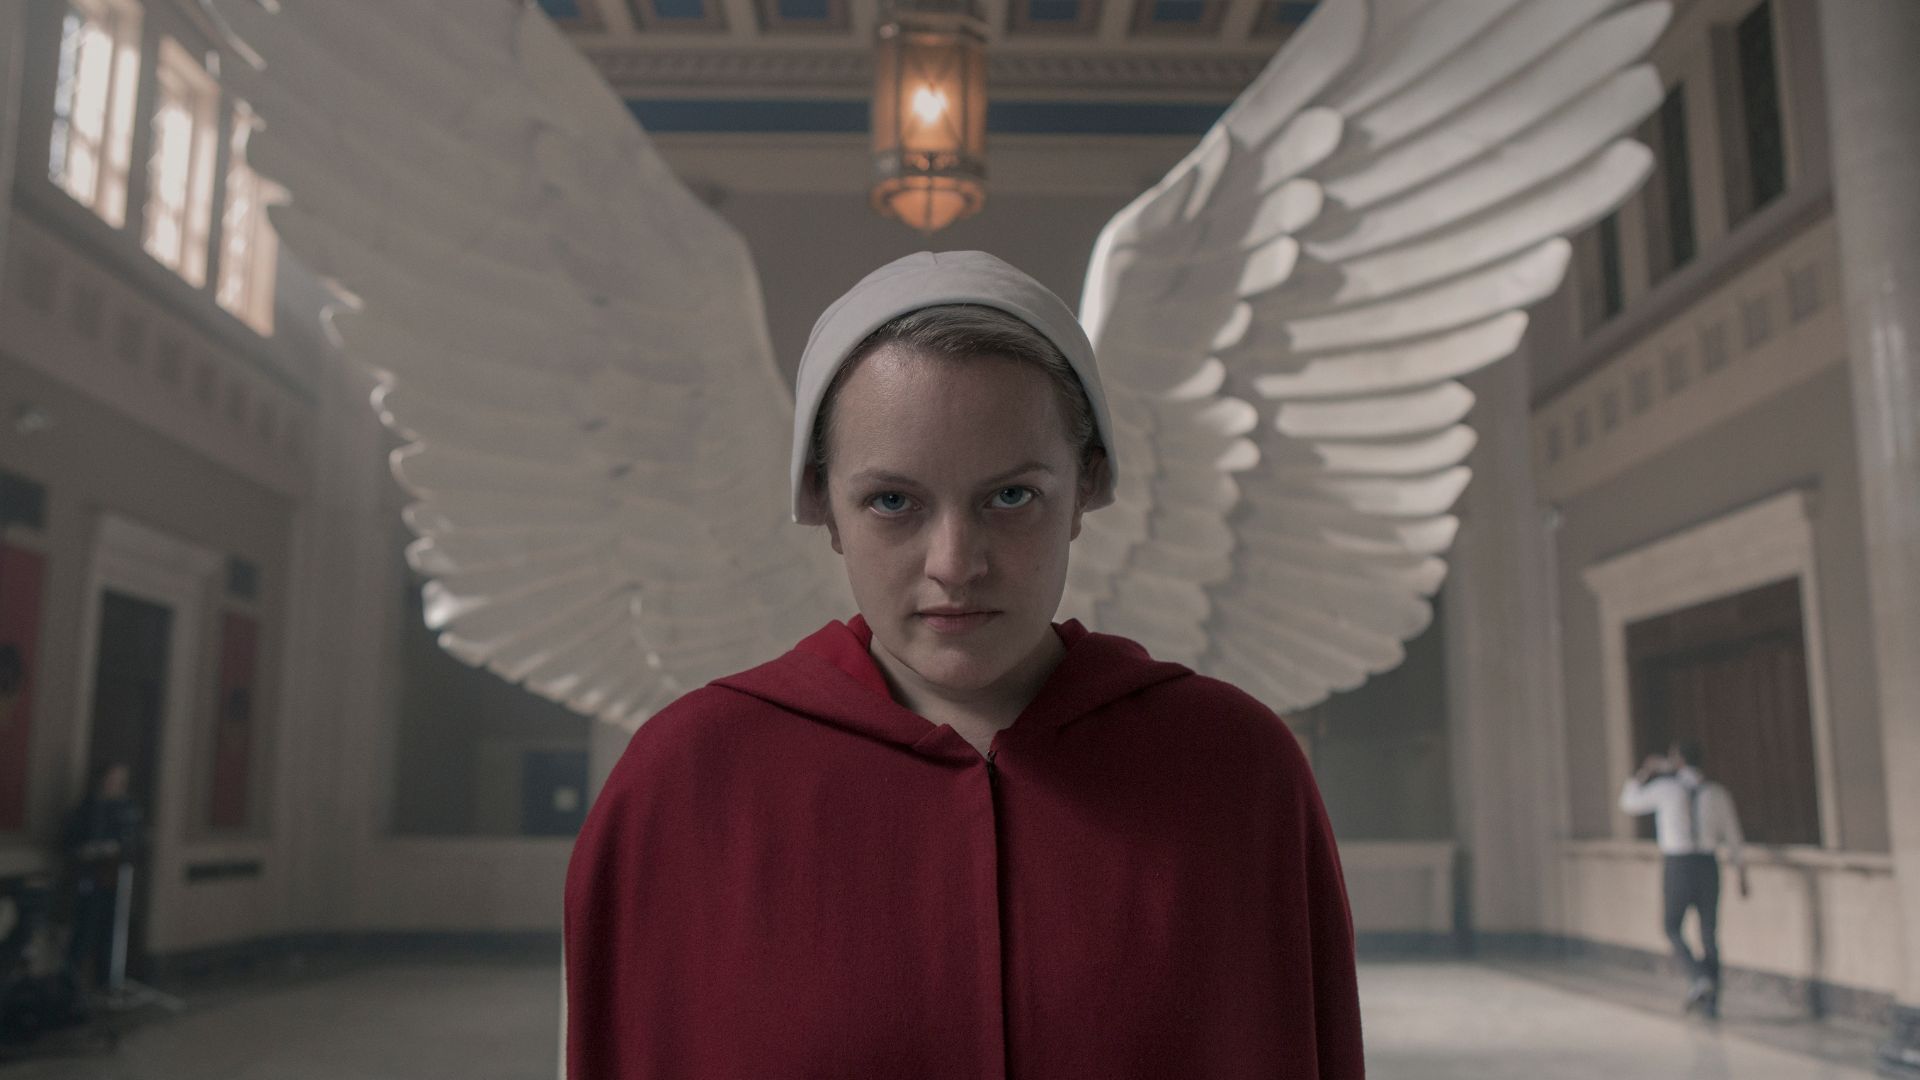 Elizabeth Moss and The Handmaid's Tale director rejoin forces for thriller Run Rabbit Run